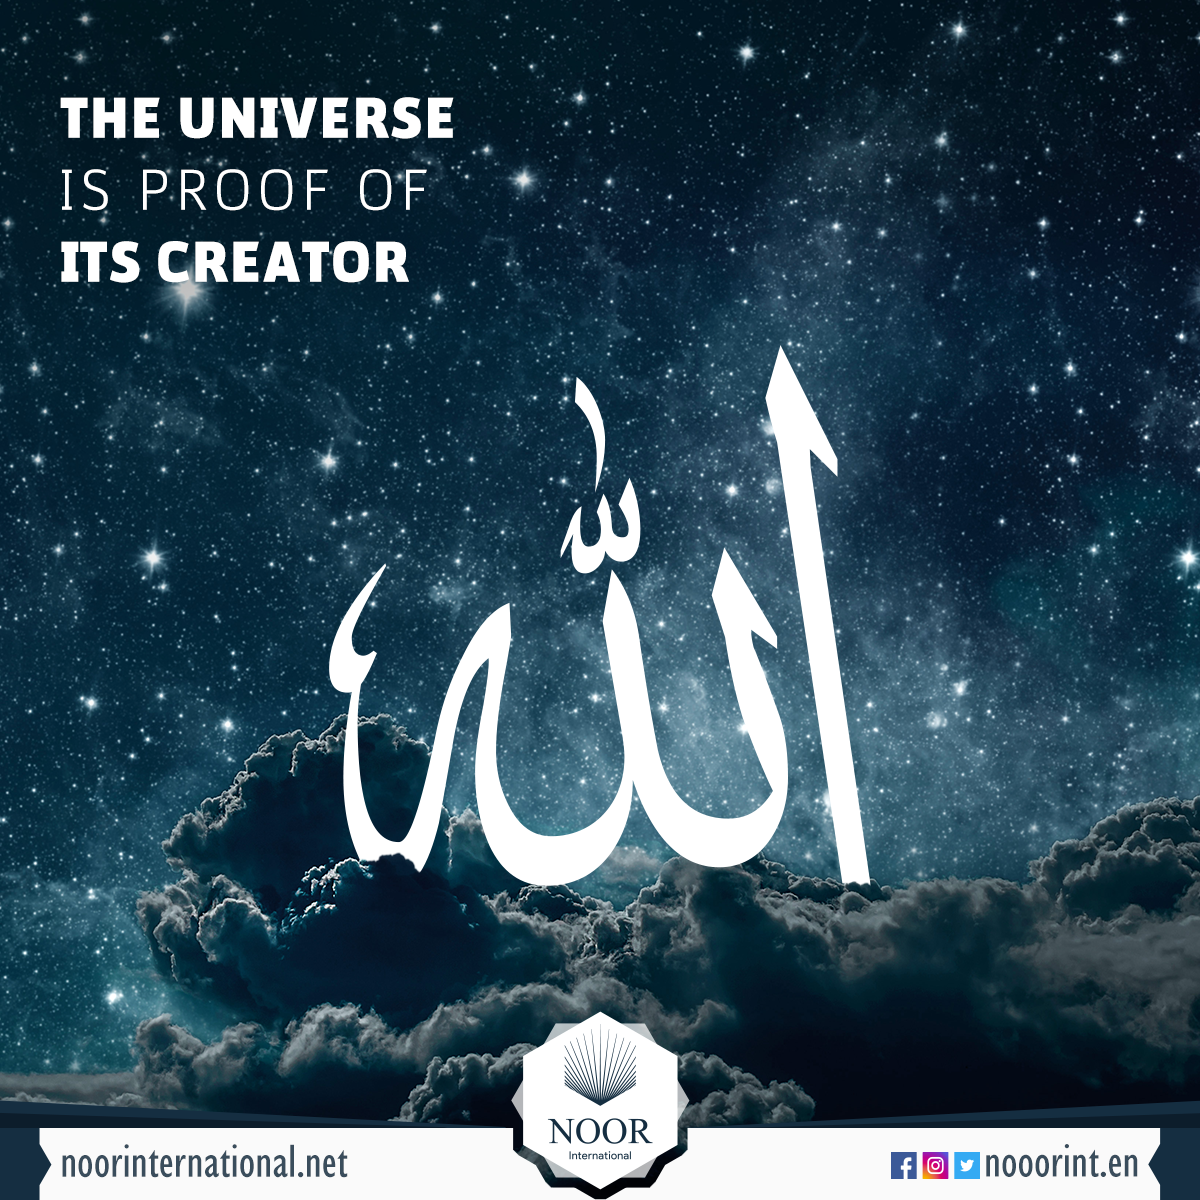 The universe is proof of its Creator